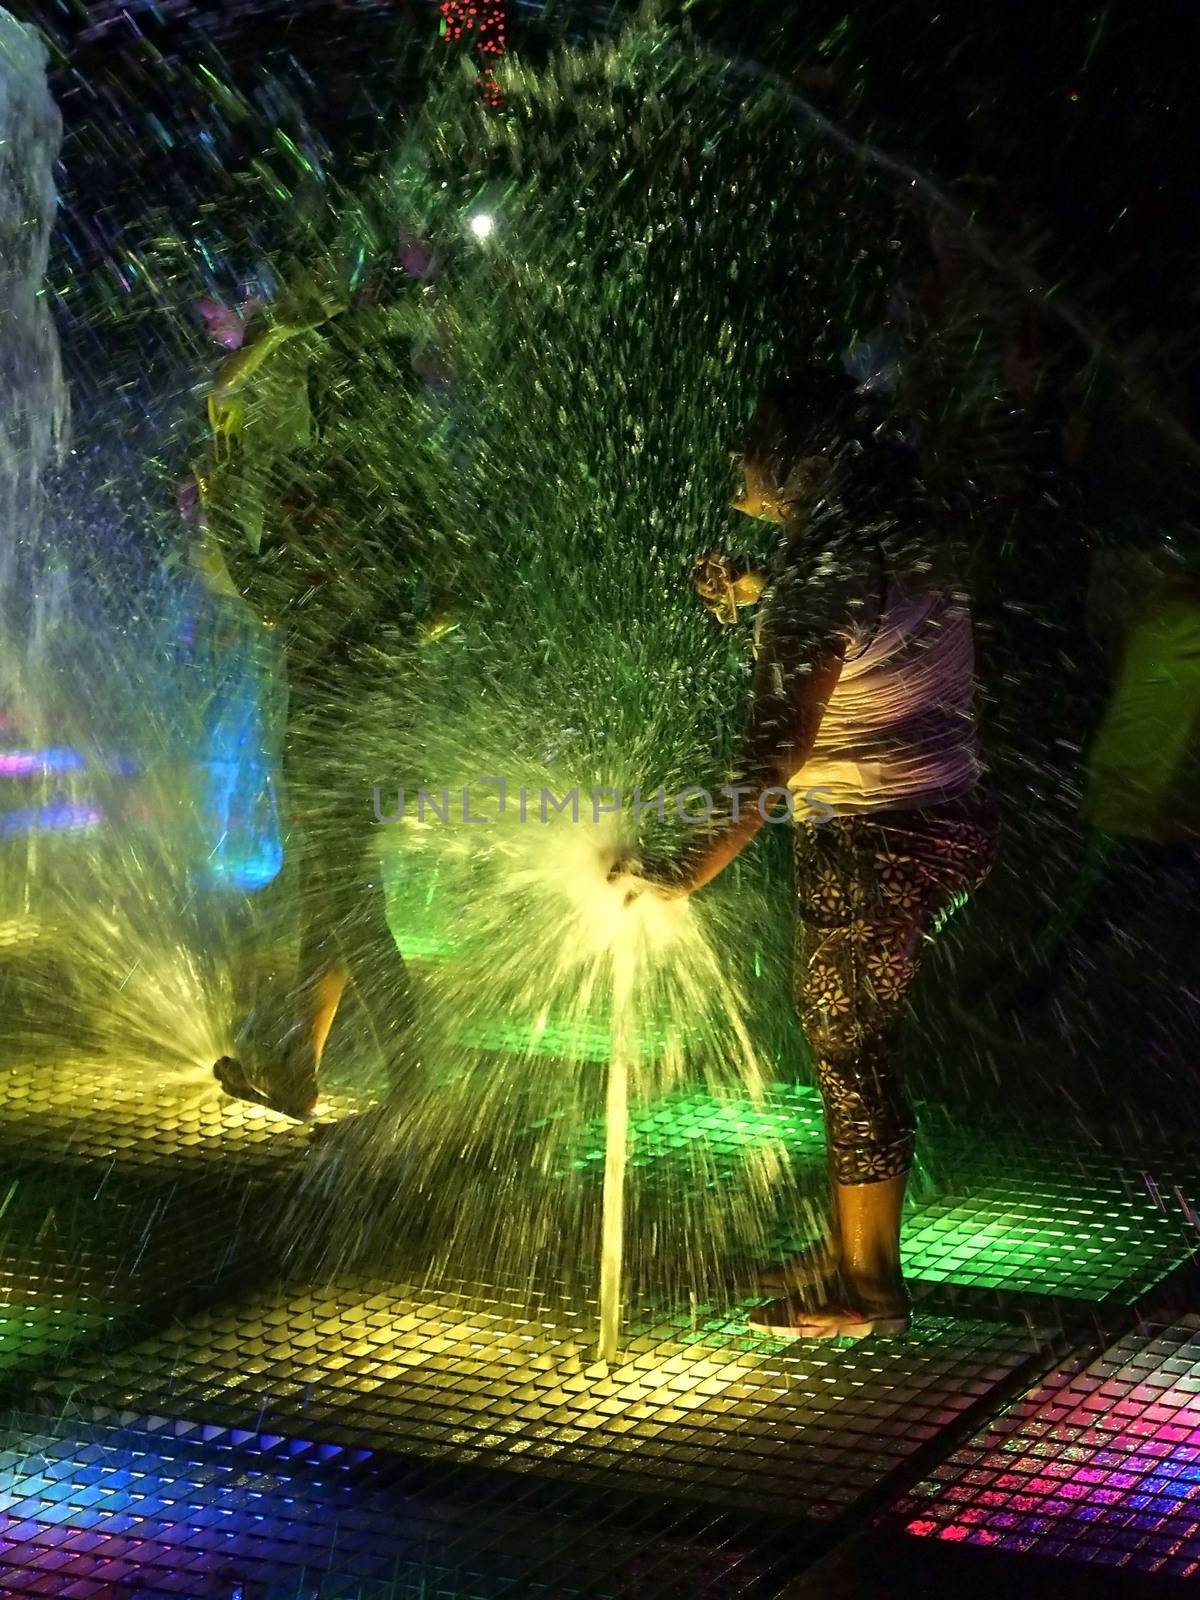 PERU, Lima: A child plays with water in a fountain as dozens of people assist to light and water show in front of the largest water wall of the world just inaugurated in the Park of the Reserve, Lima, Peru on January 15, 2016. 